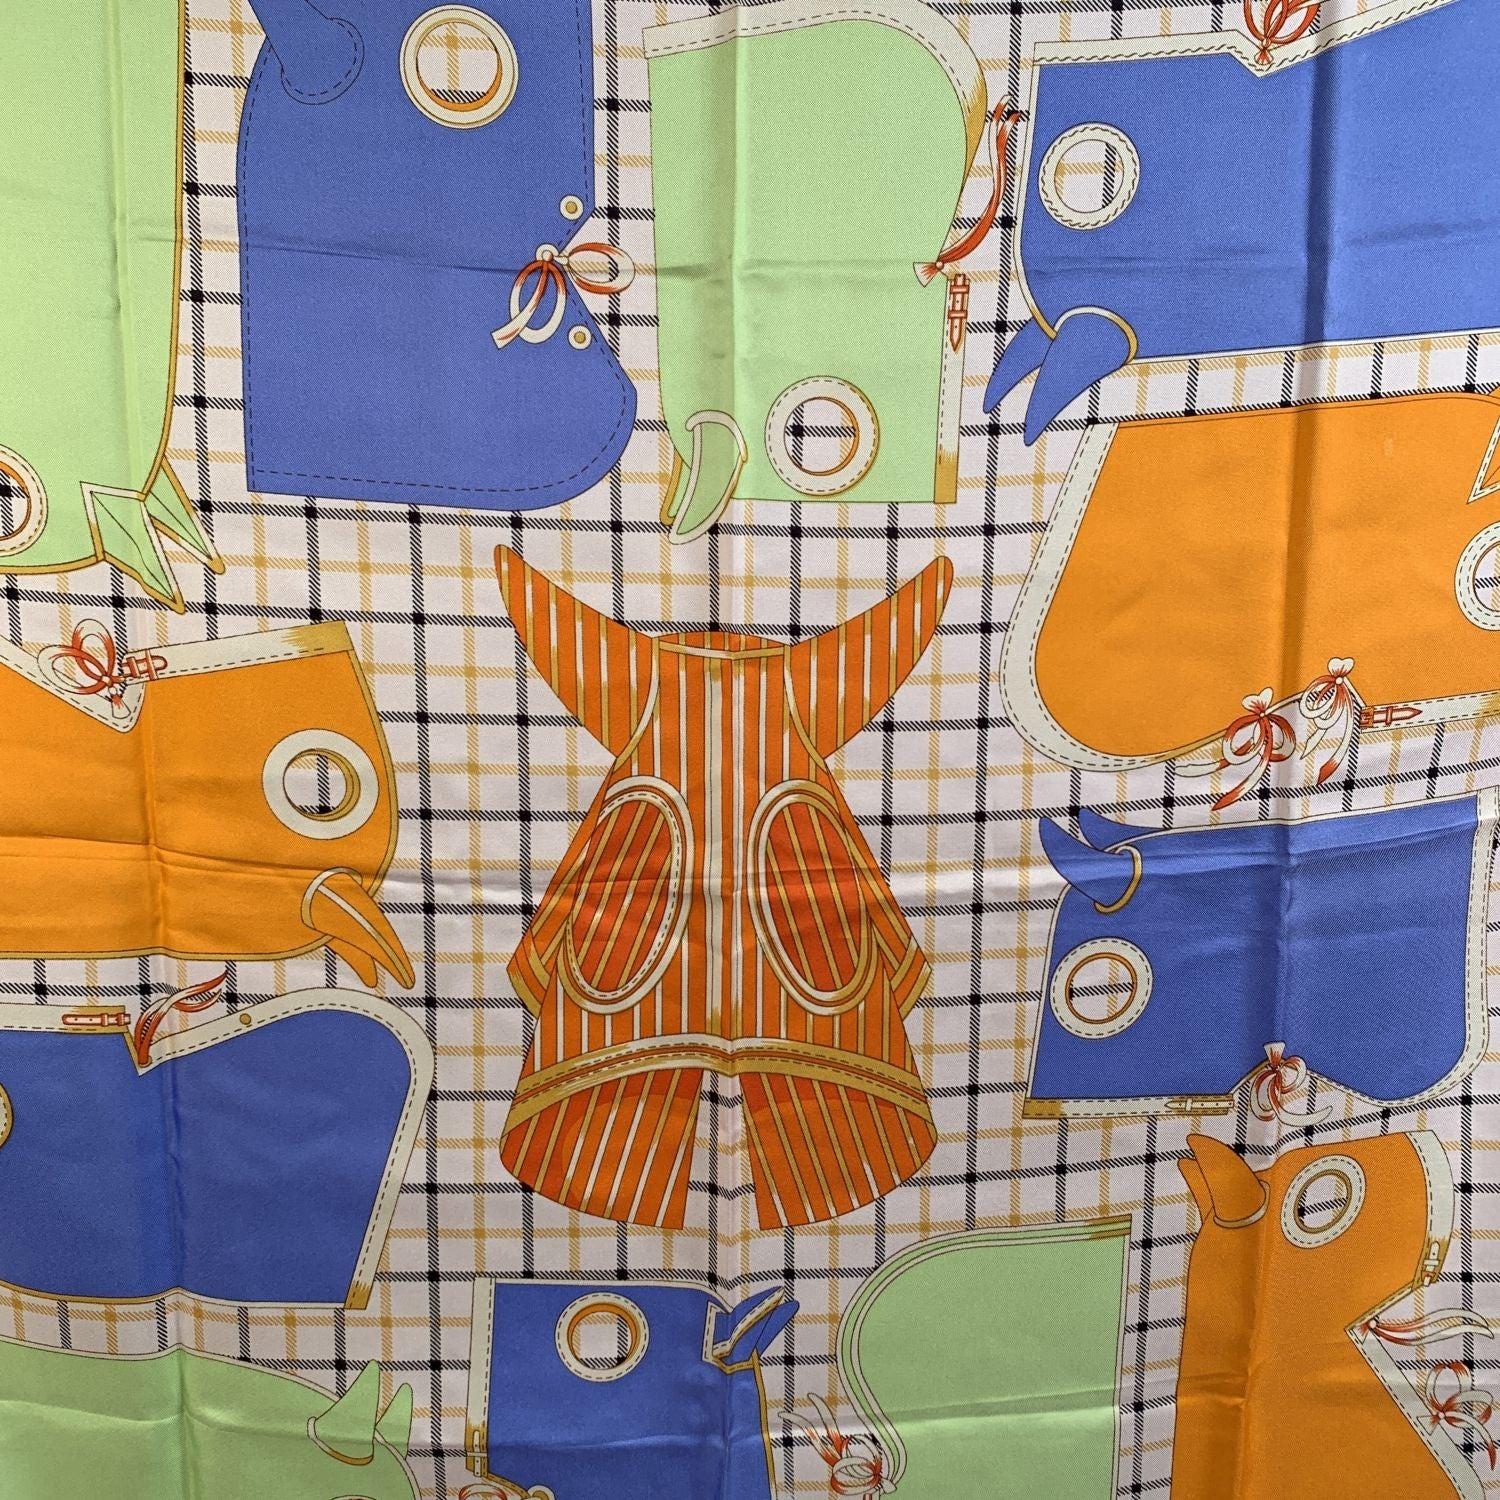 Beautiful Hermes 'Camails' silk scarf designed by Francoise de la Perriere and originally issued in 1974. The design depicts some horse hoods in light blue, orange and light green colors against a checkered white background. Hot pink border. Hand